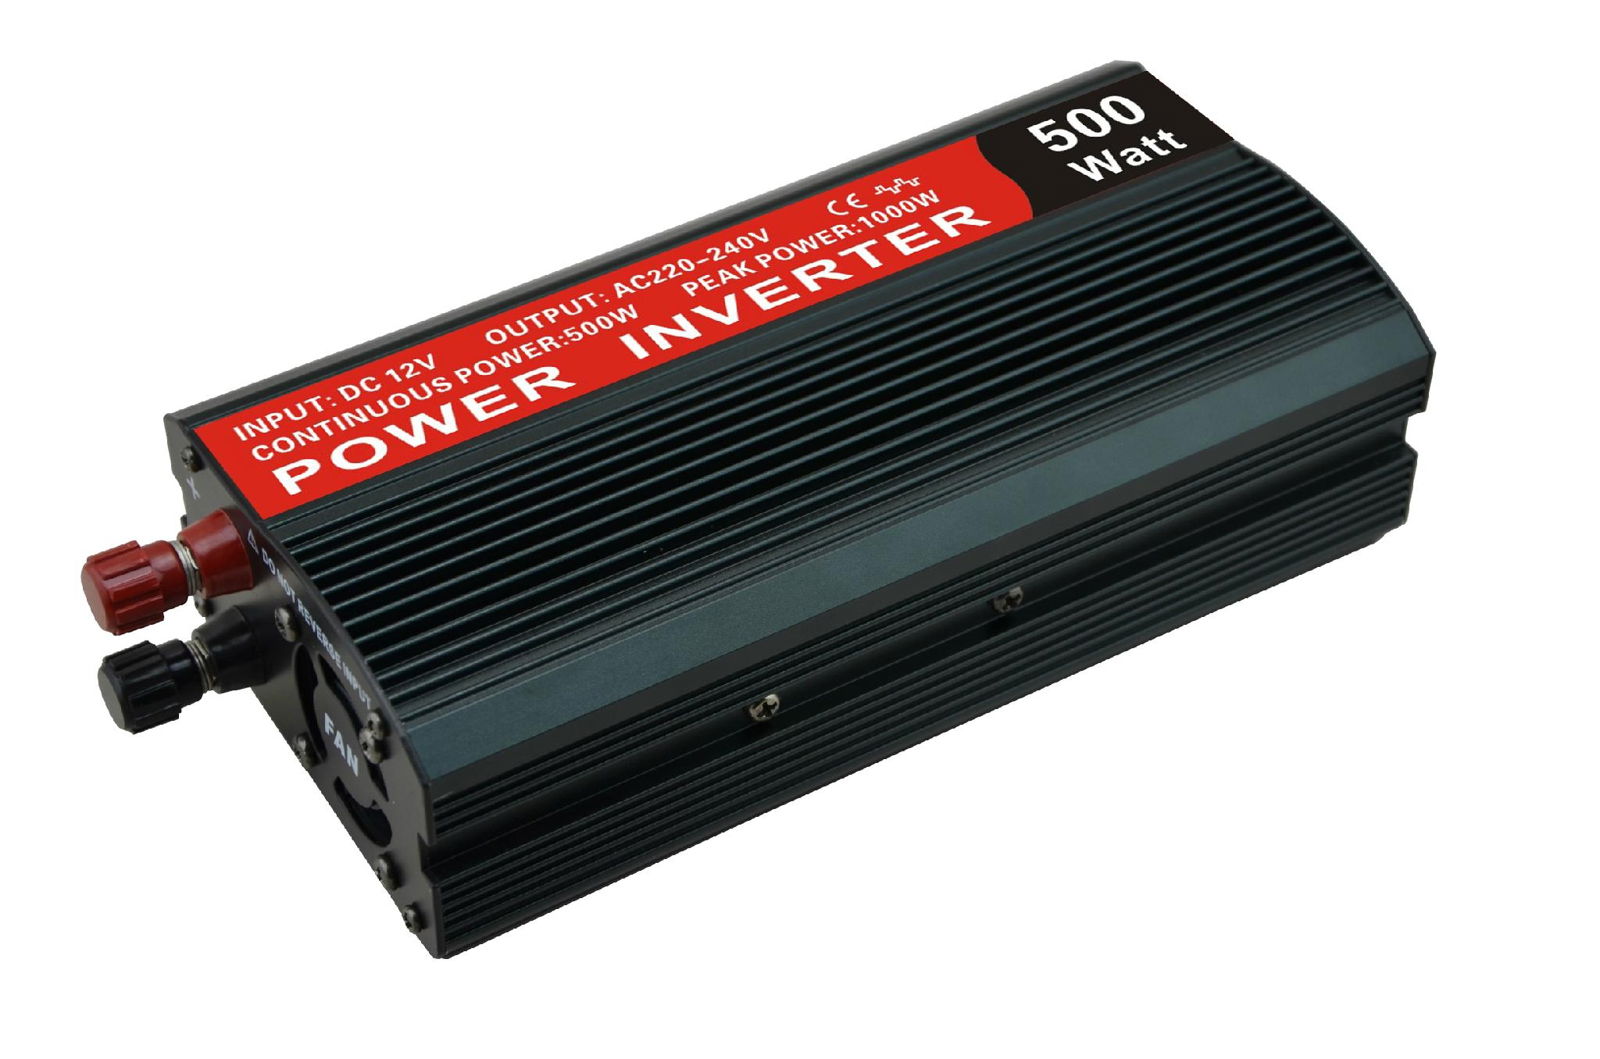 RX- 500 Modified sine wave inverter high frequency 3